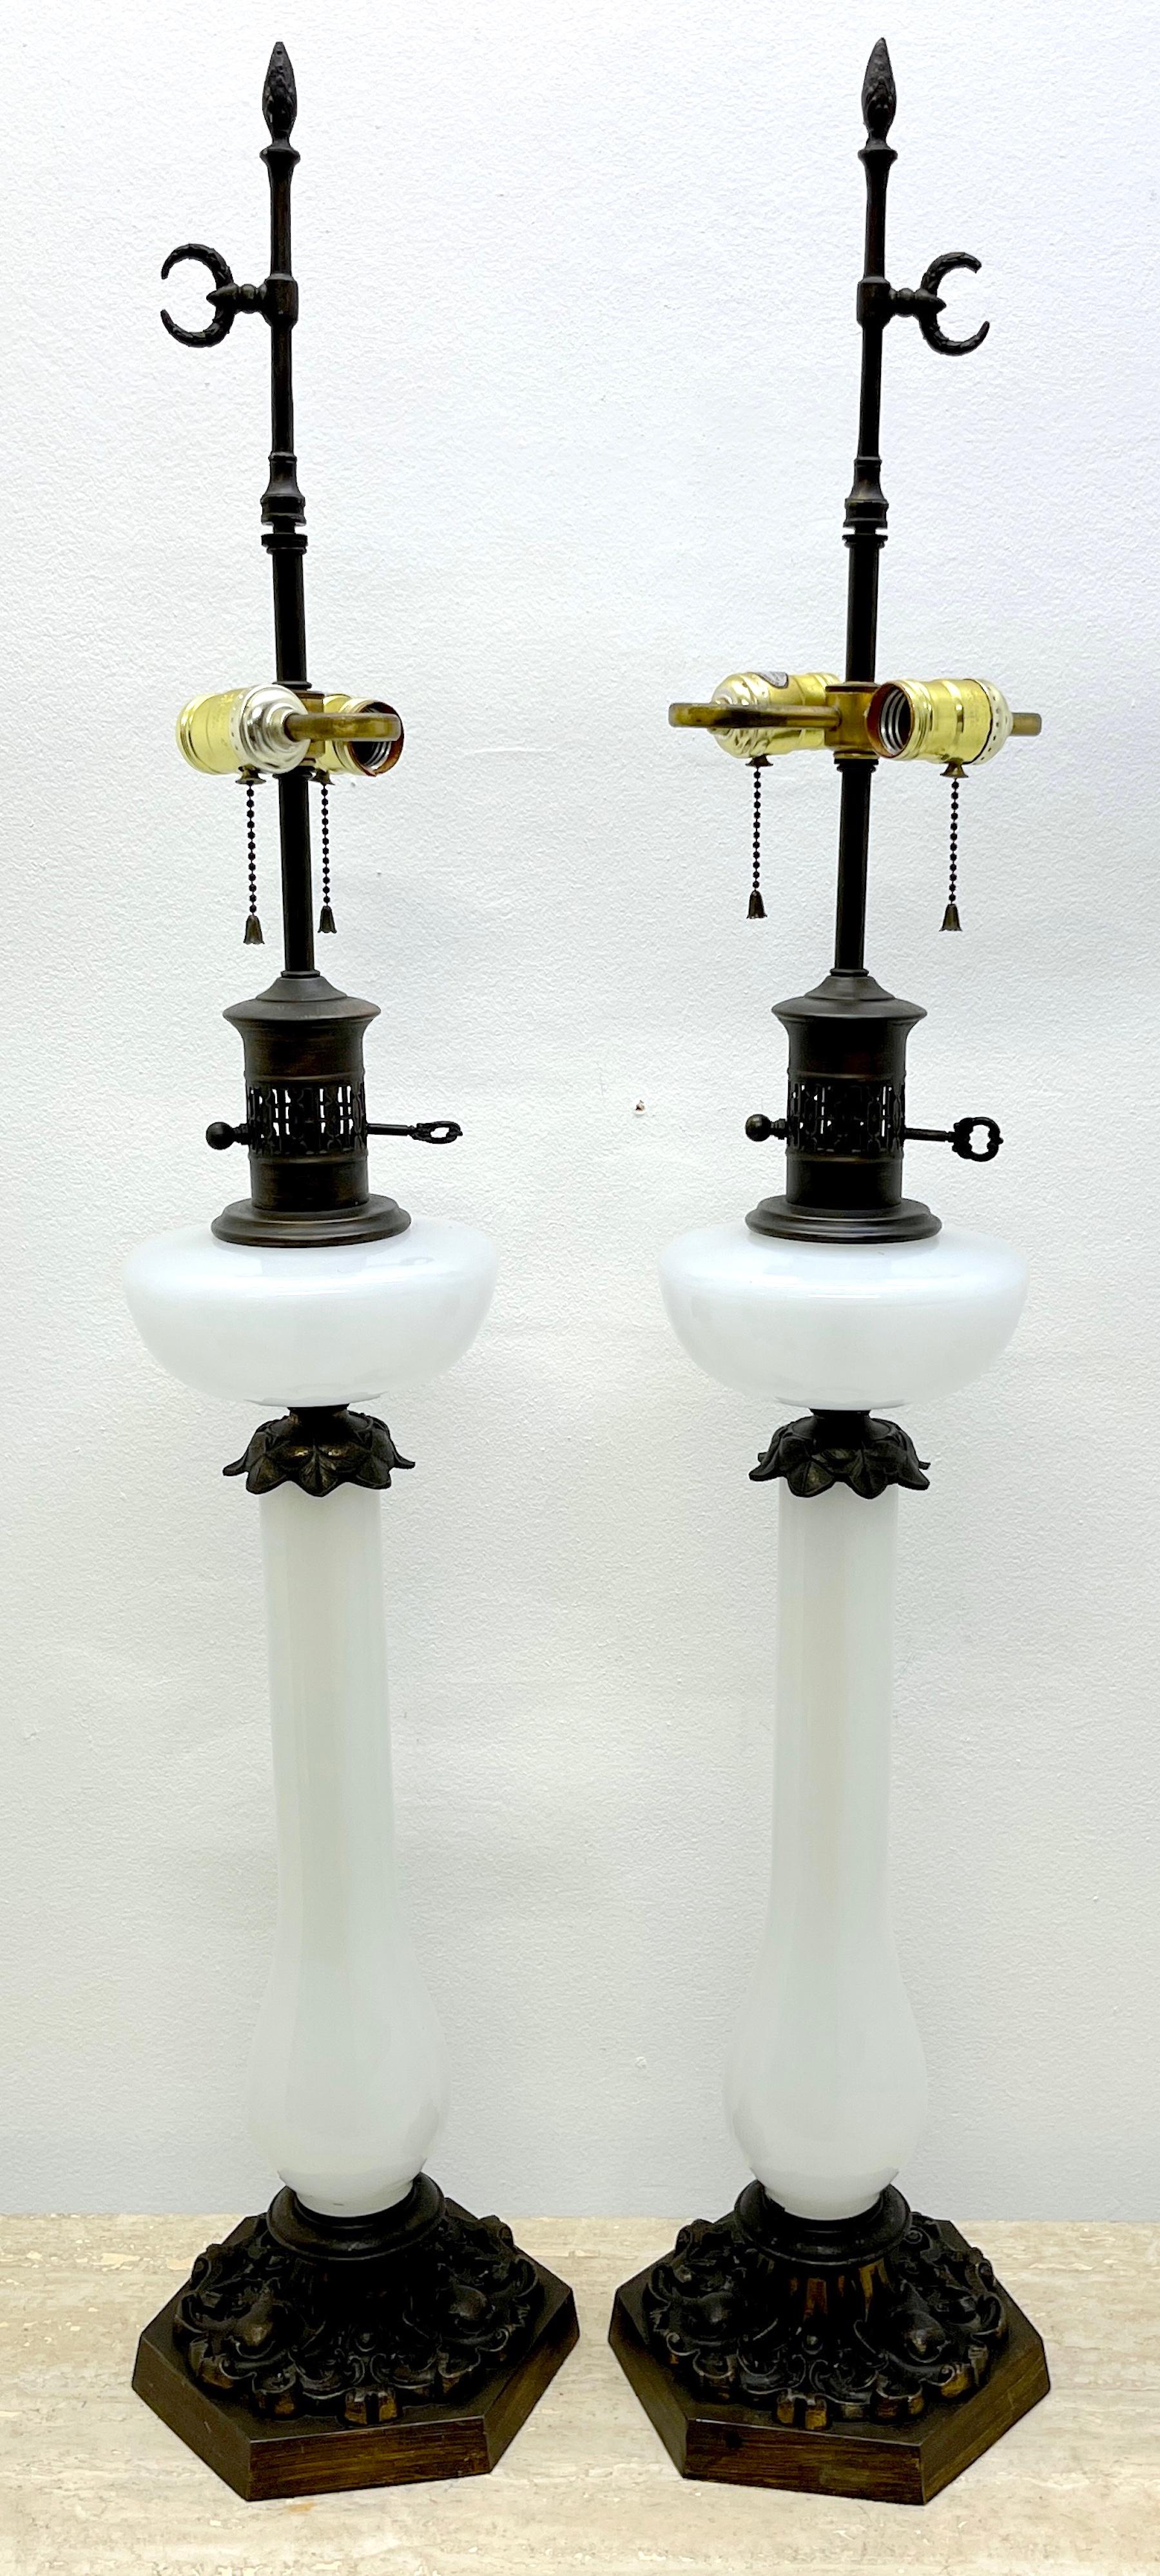 Pair of Tall French Neoclassical Opaline Oil Lamps, Now Electrified 
Oil Lamps later 19th century, Electrified 1960s 

Each one standing 40 inches tall with wreath crescent finials, fitted with neoclassical patinated metal mounts, fitted for